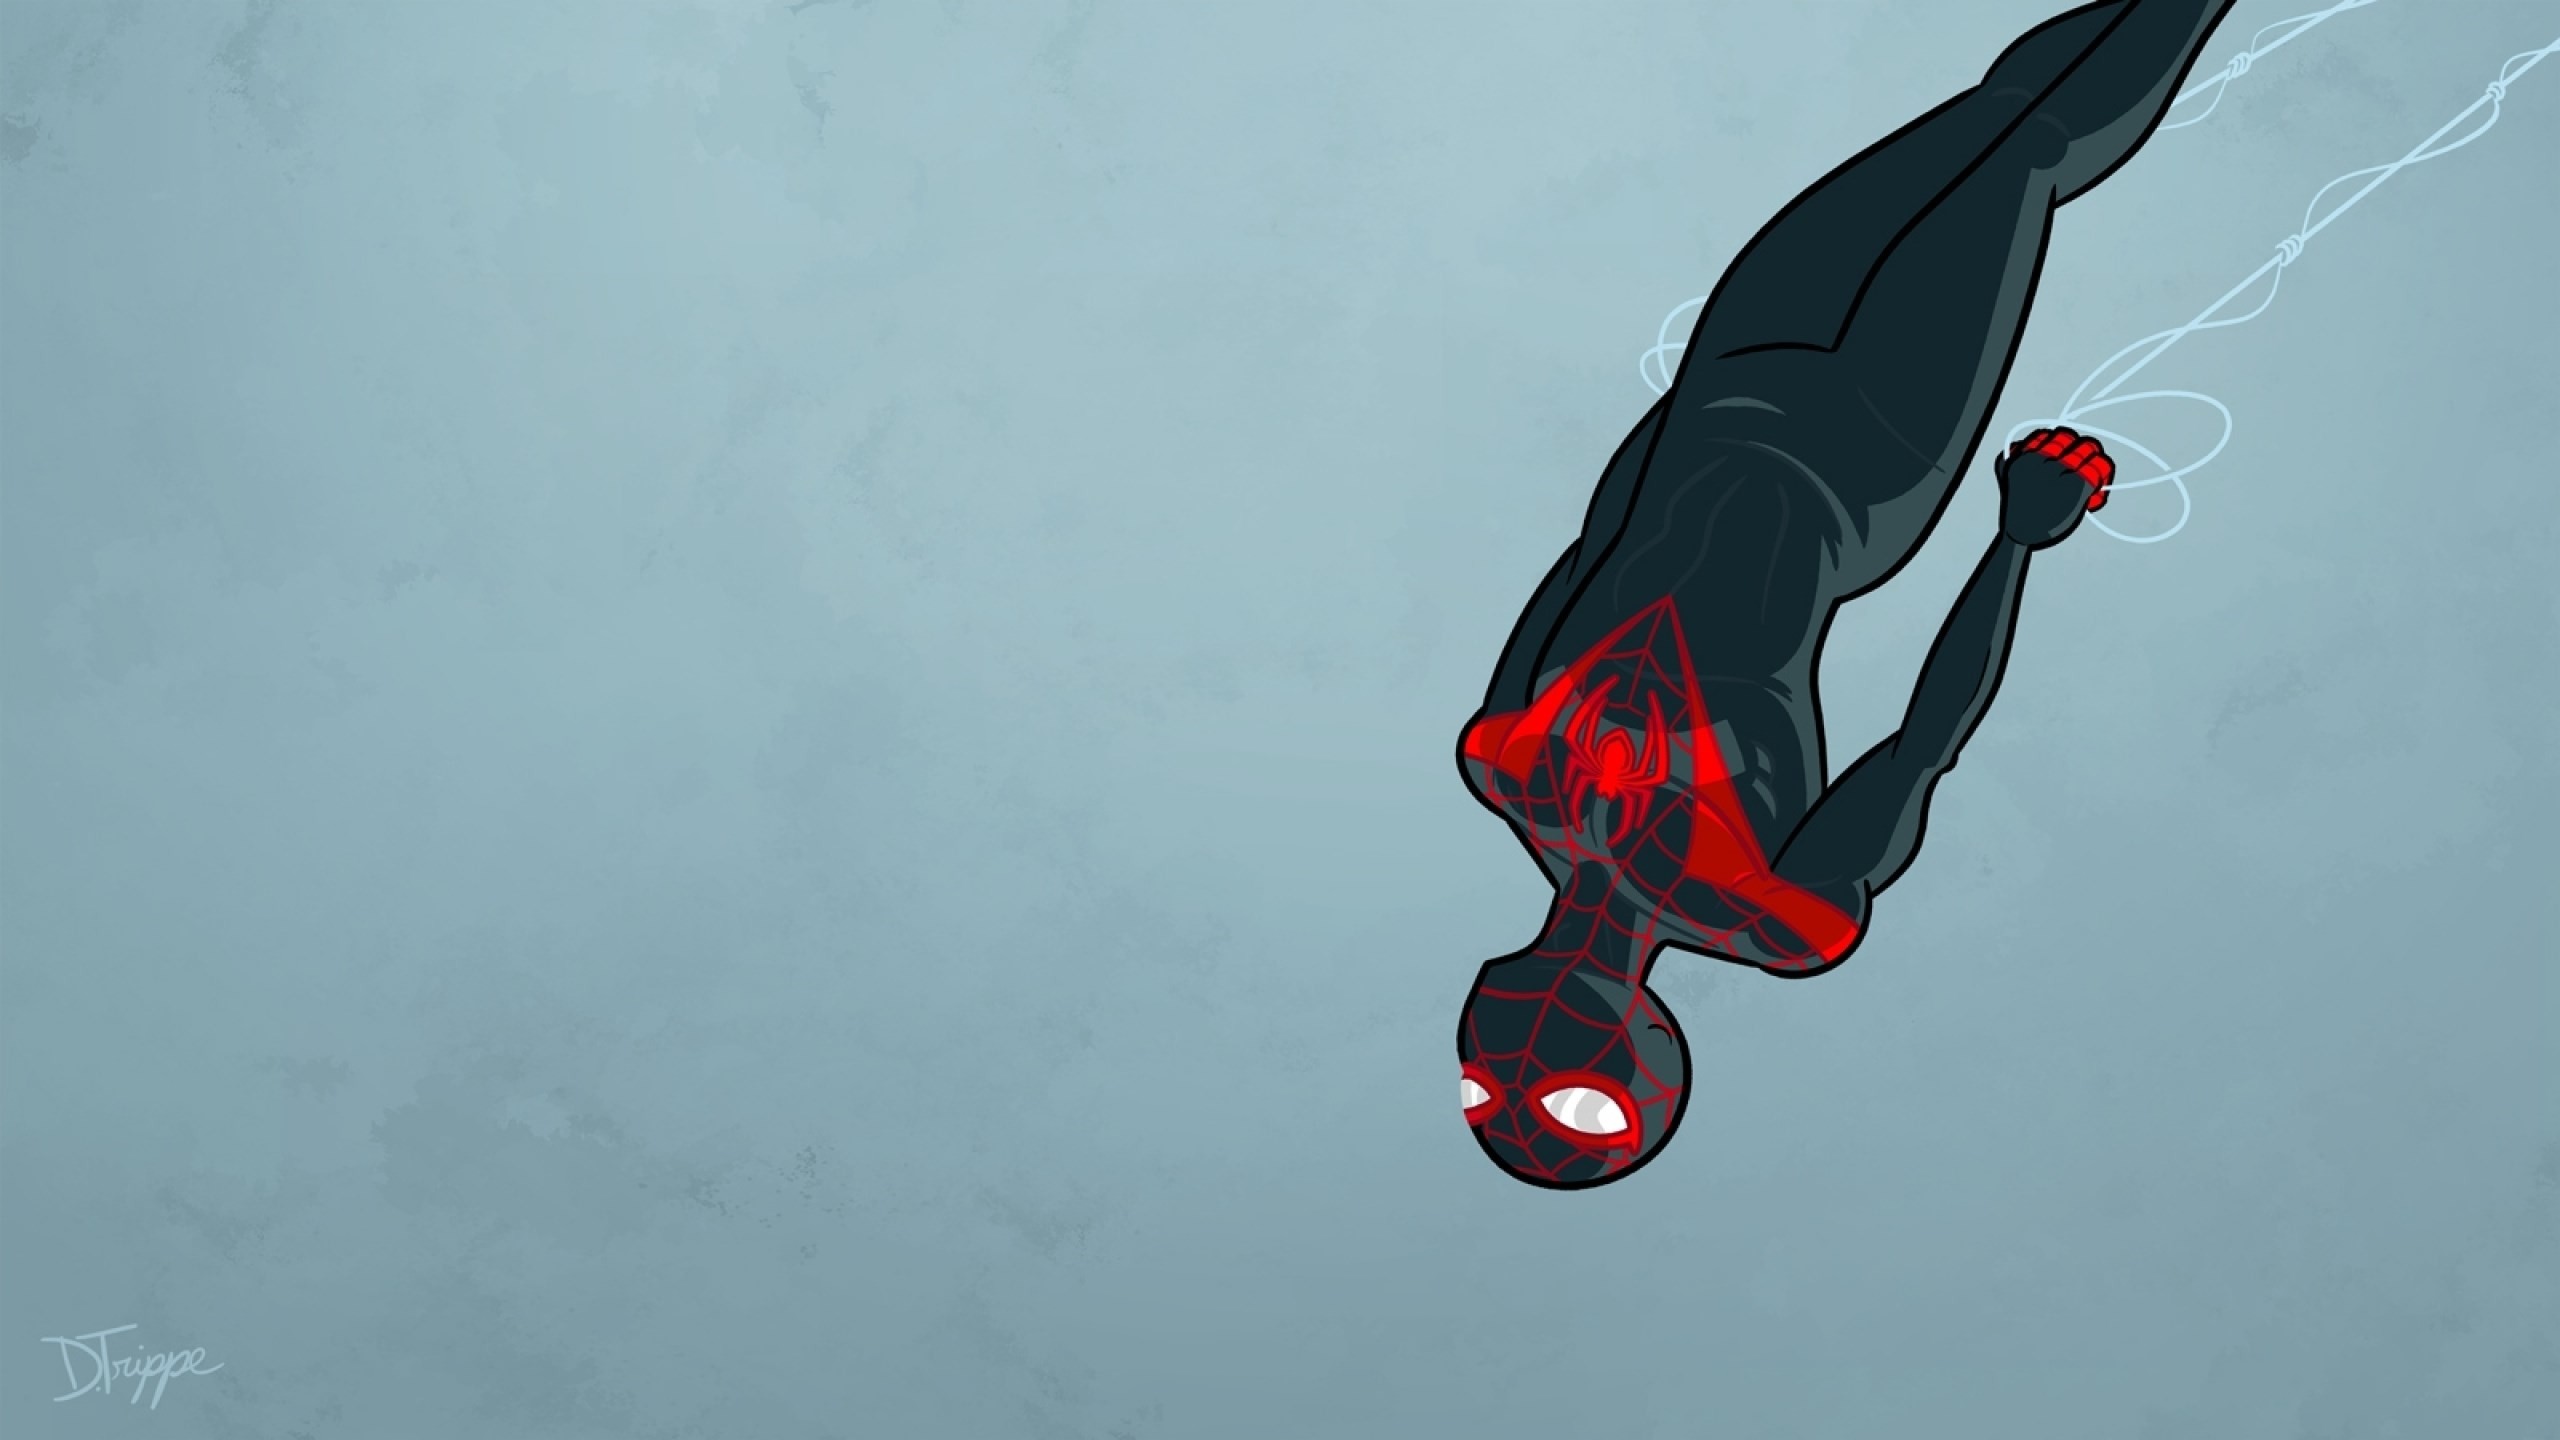 2560x1440 ultimate spider man wallpaper hd backgrounds images, 177 kB - Jefford  Sinclair